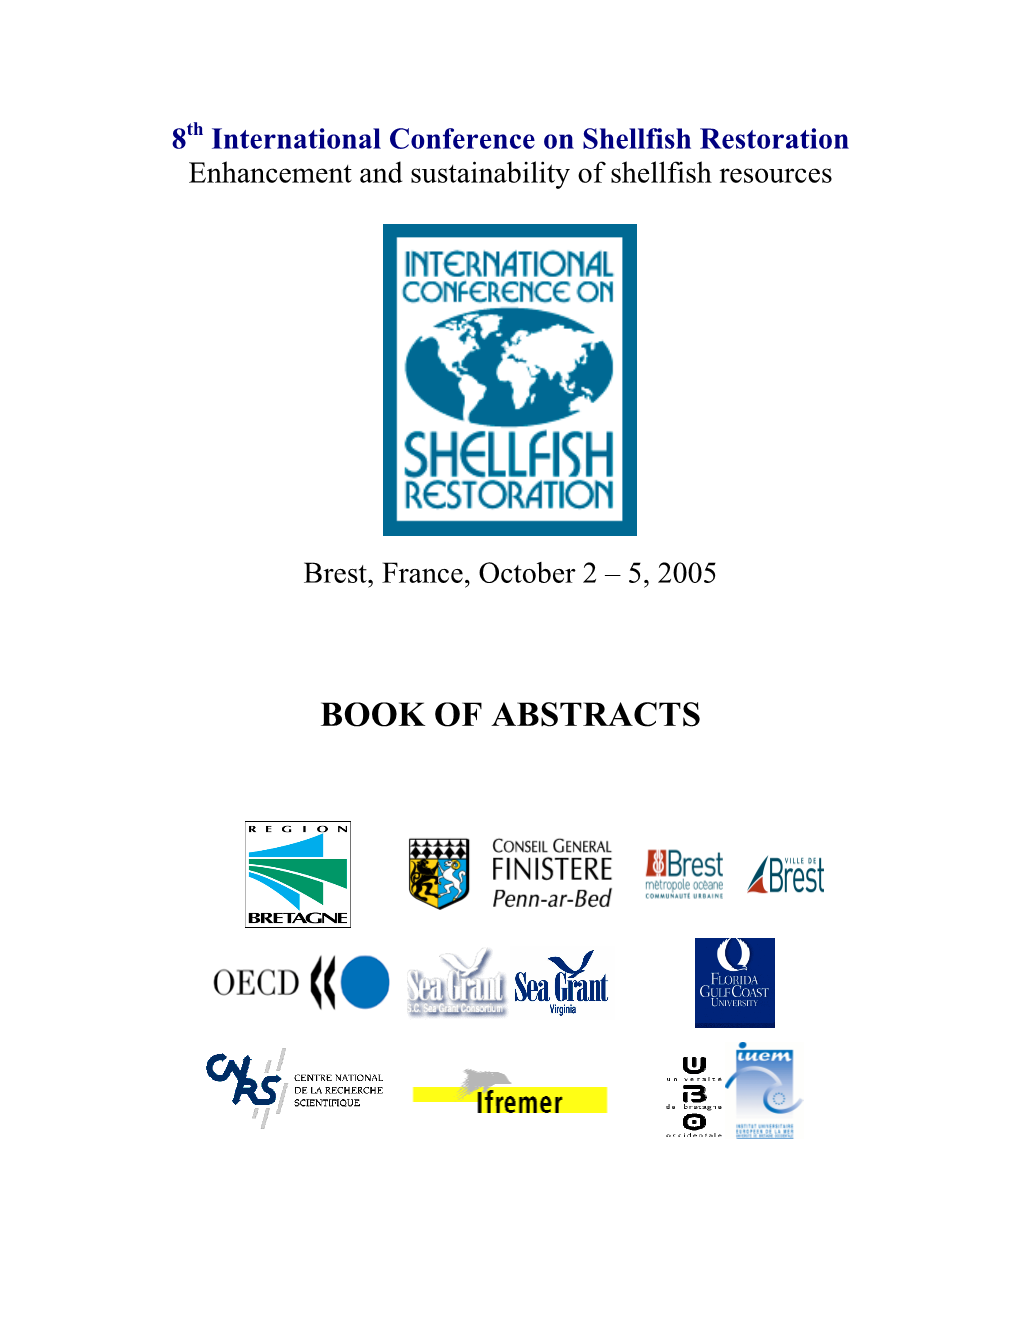 Book of Abstracts Sponsors of Icsr 2005 ���������������������